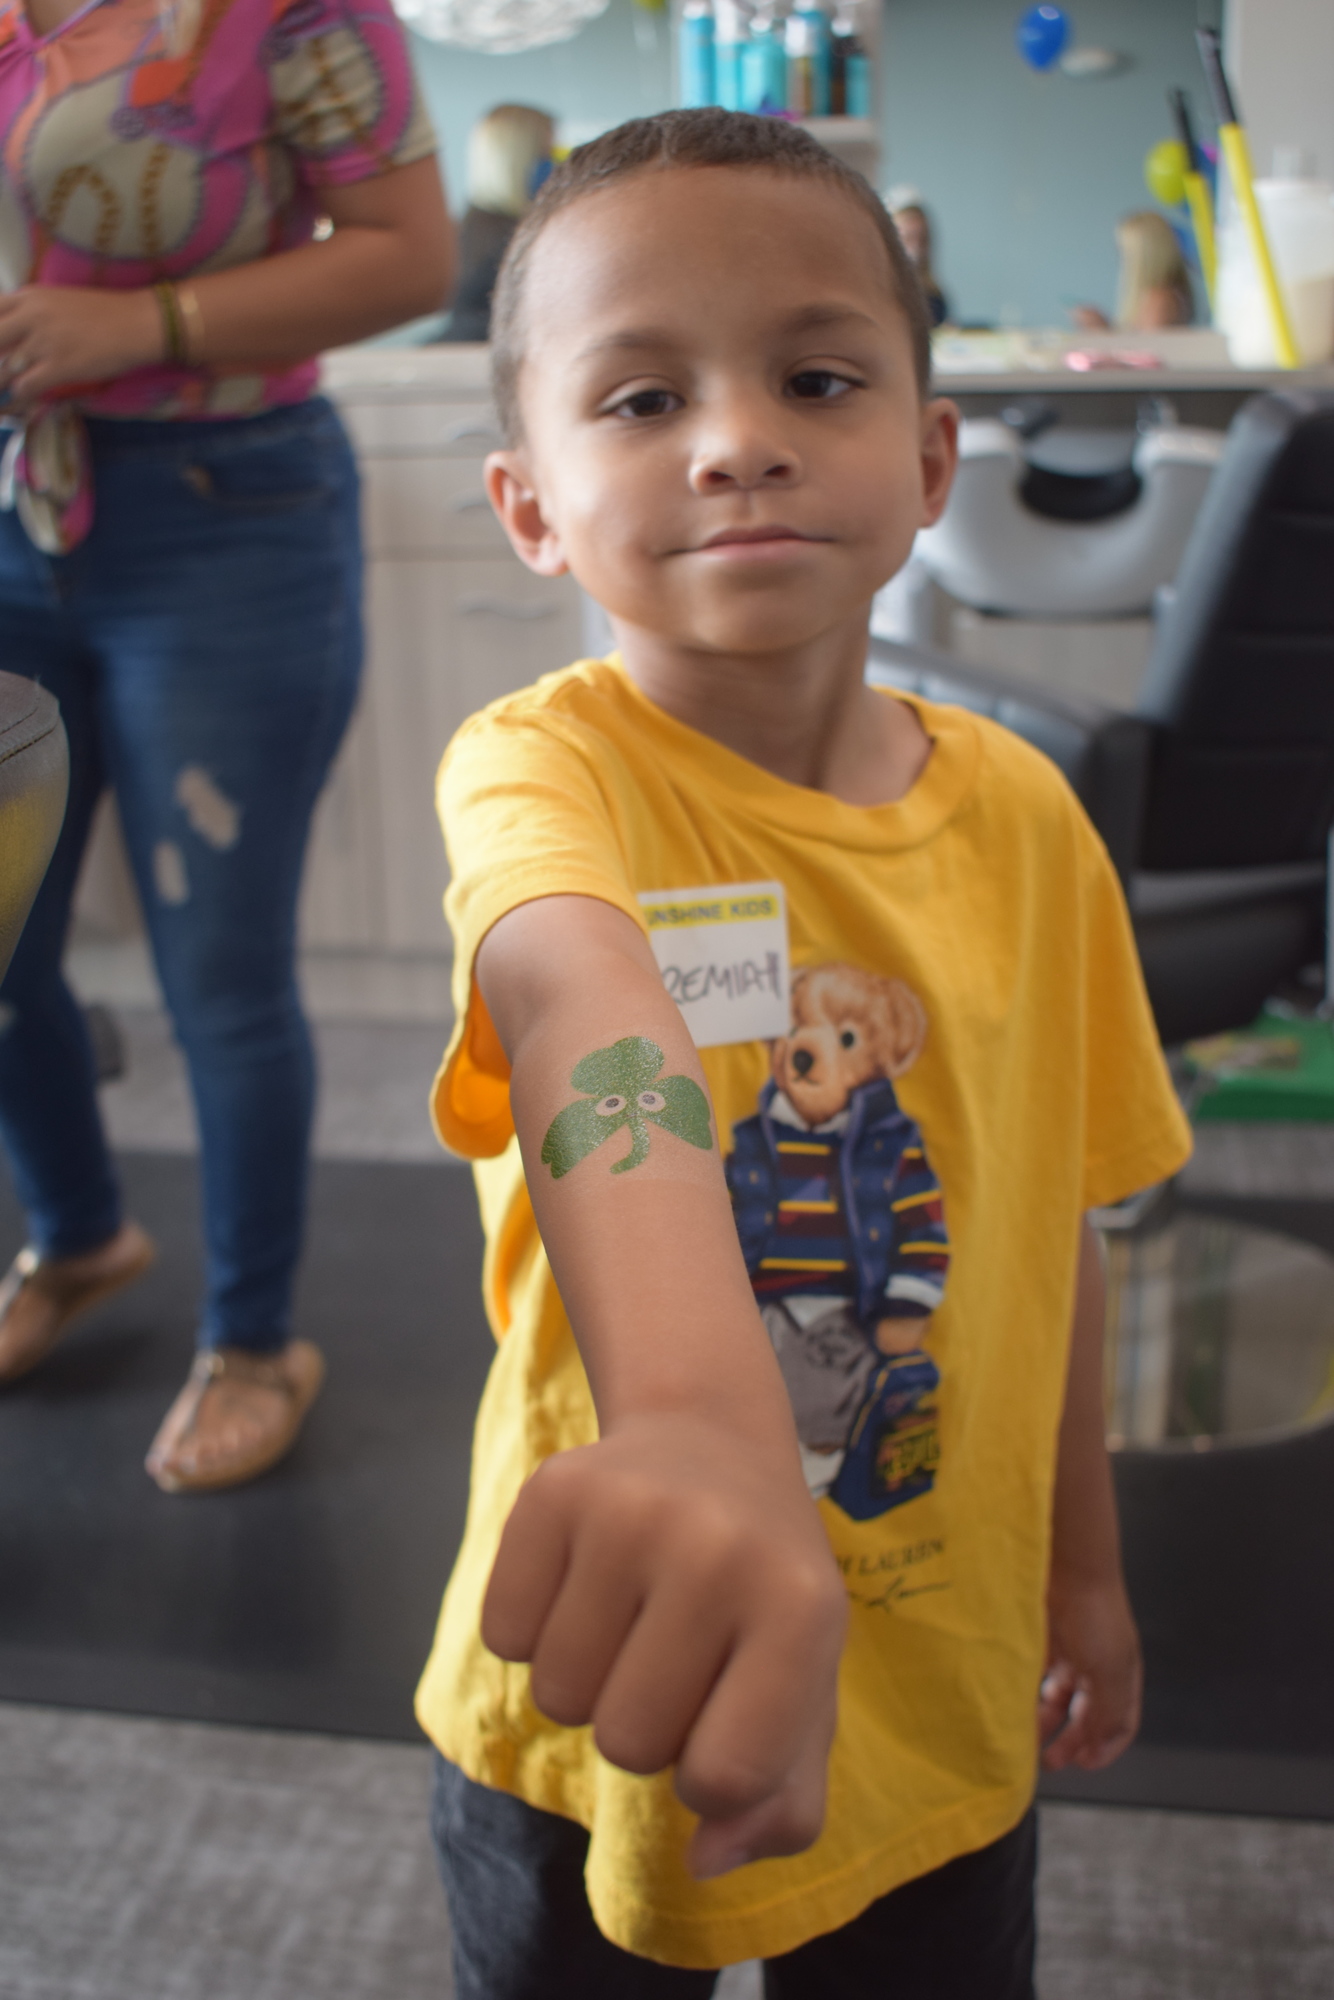 Five-year-old Jeremiah Valera shows off his temporary tattoo during the Sunshine Kids visit to Sirius Day Spa.